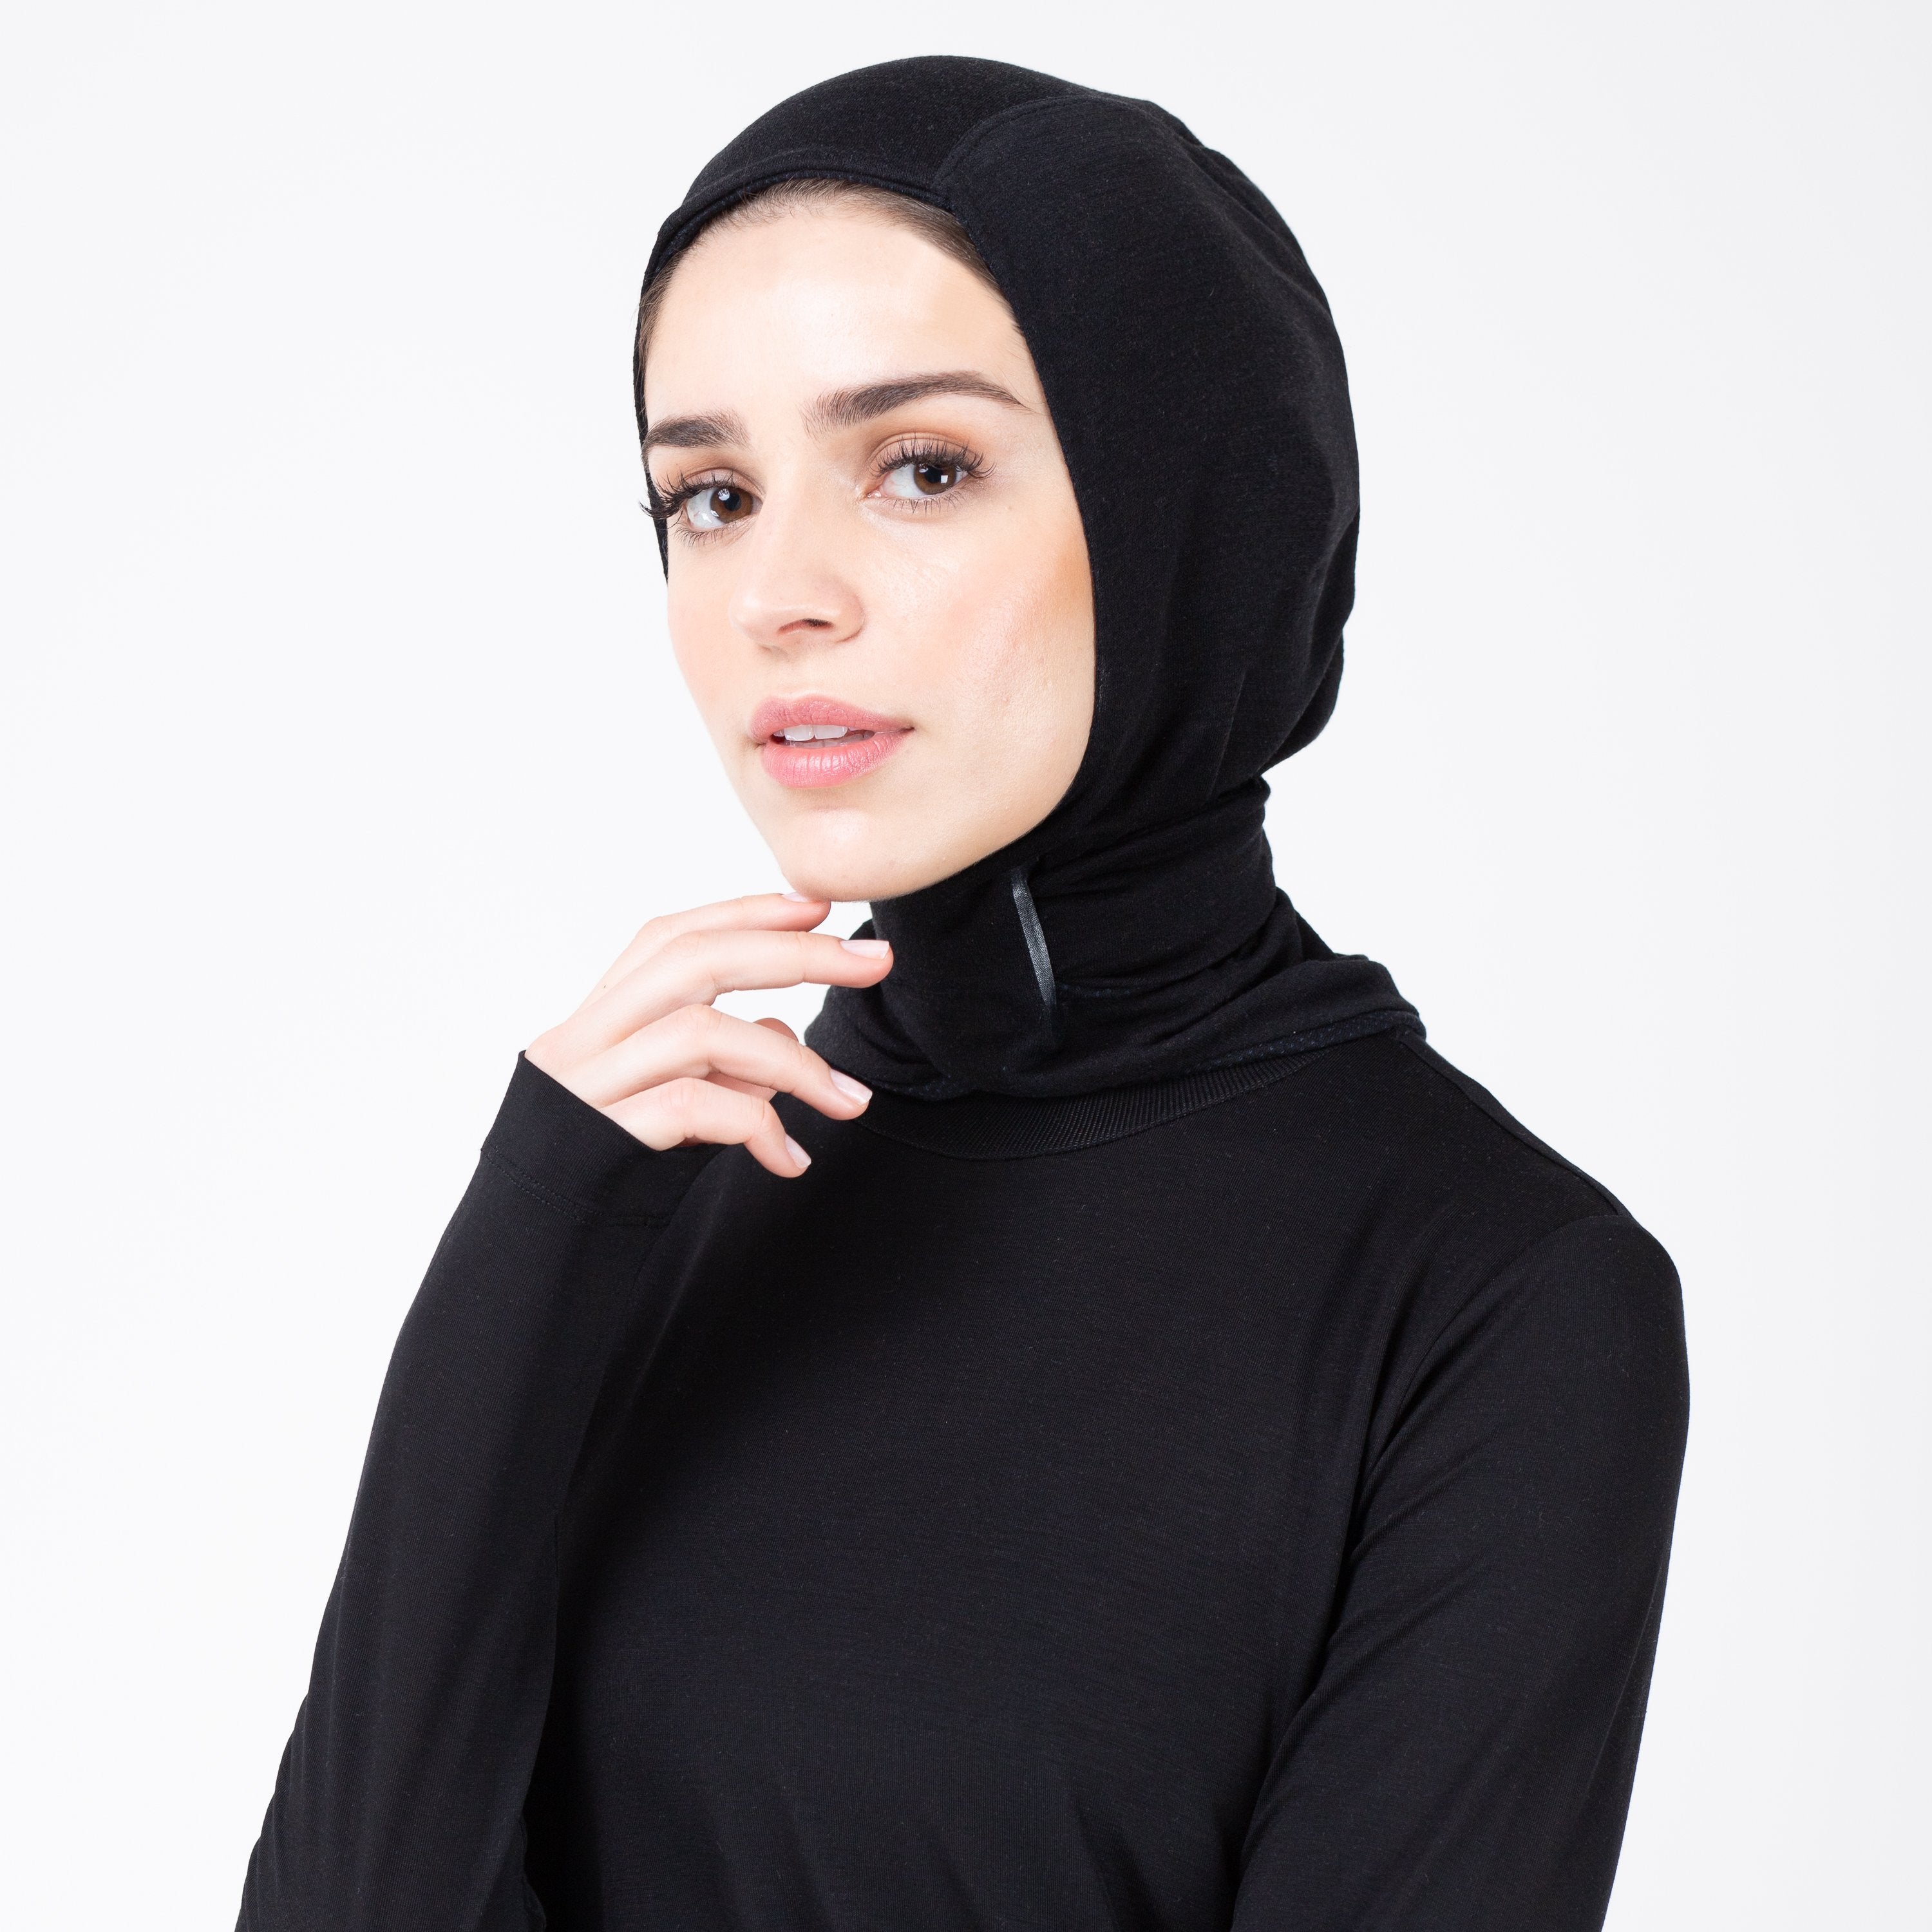 Woman facing left in black shirt and matching black HAWA hijab touching her face.